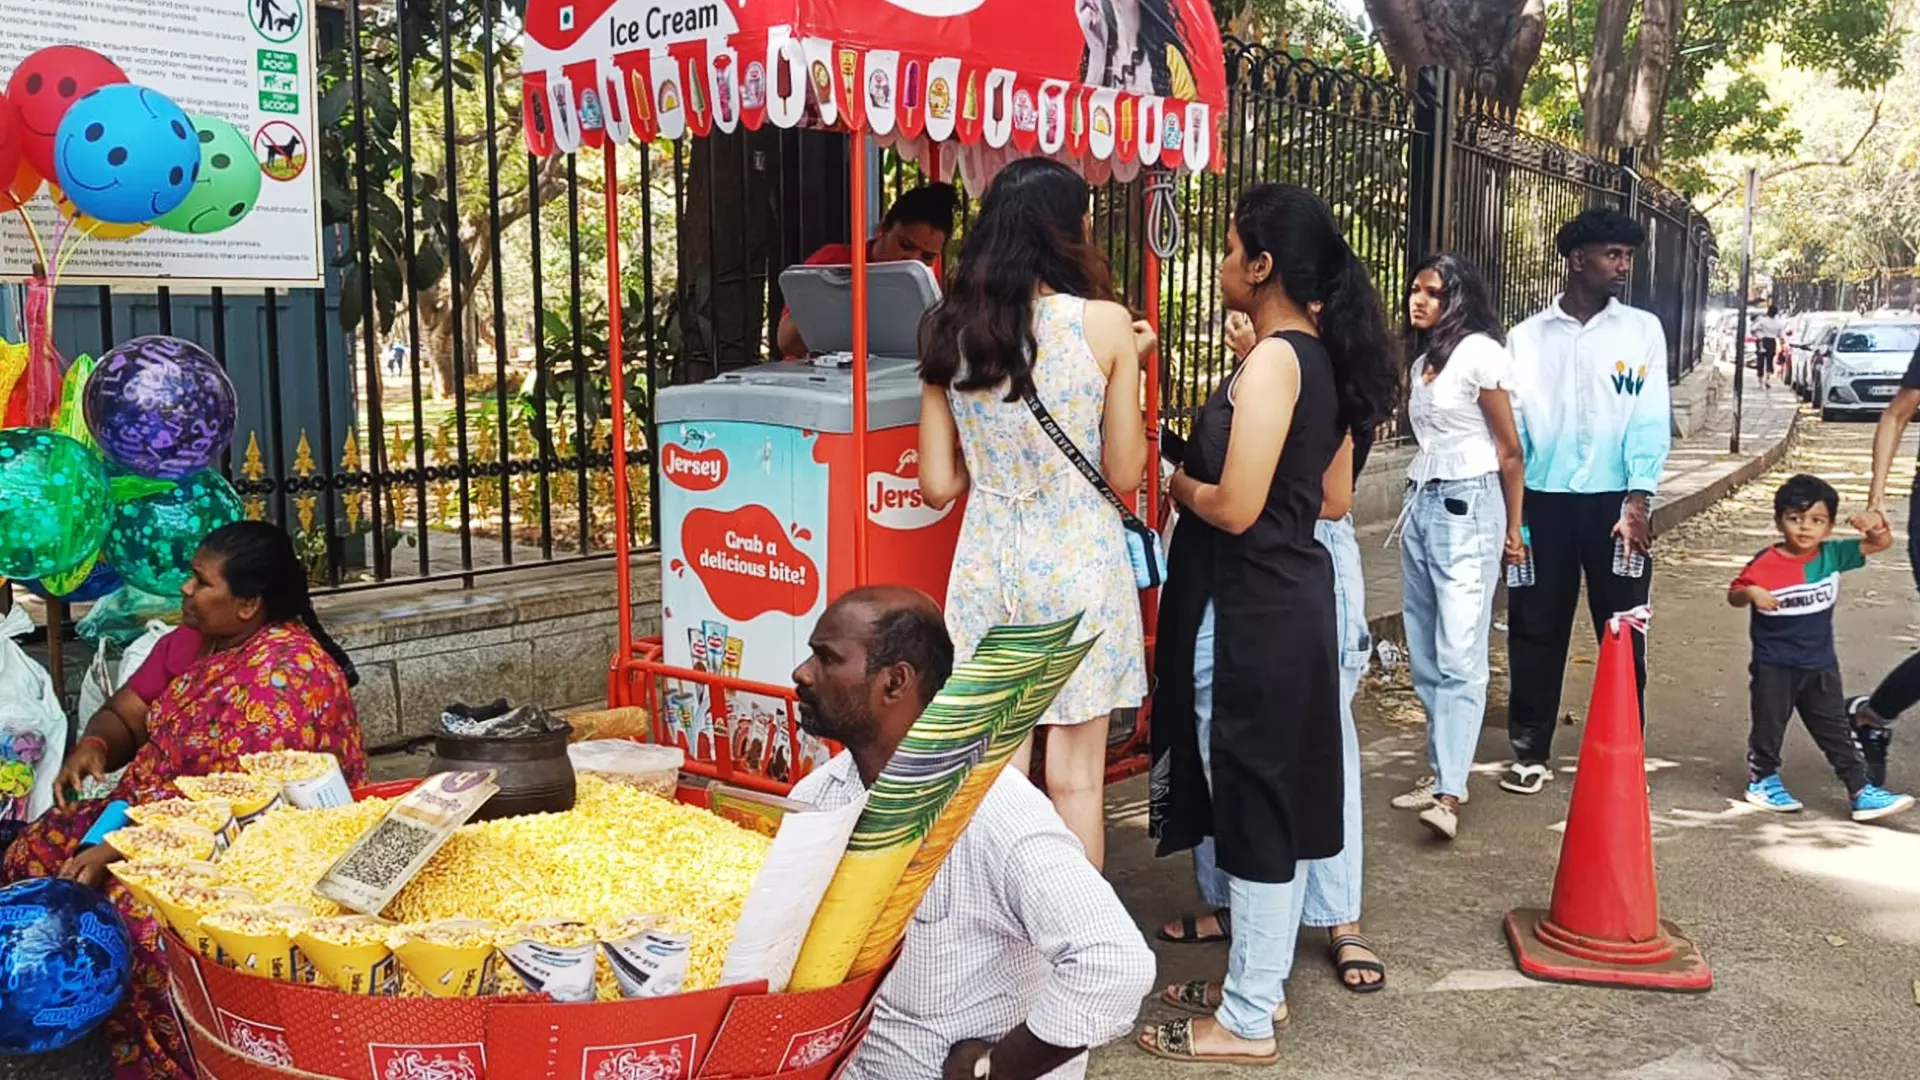 Some churumuri (puffed rice) and ice cream time at Cubbon Park.